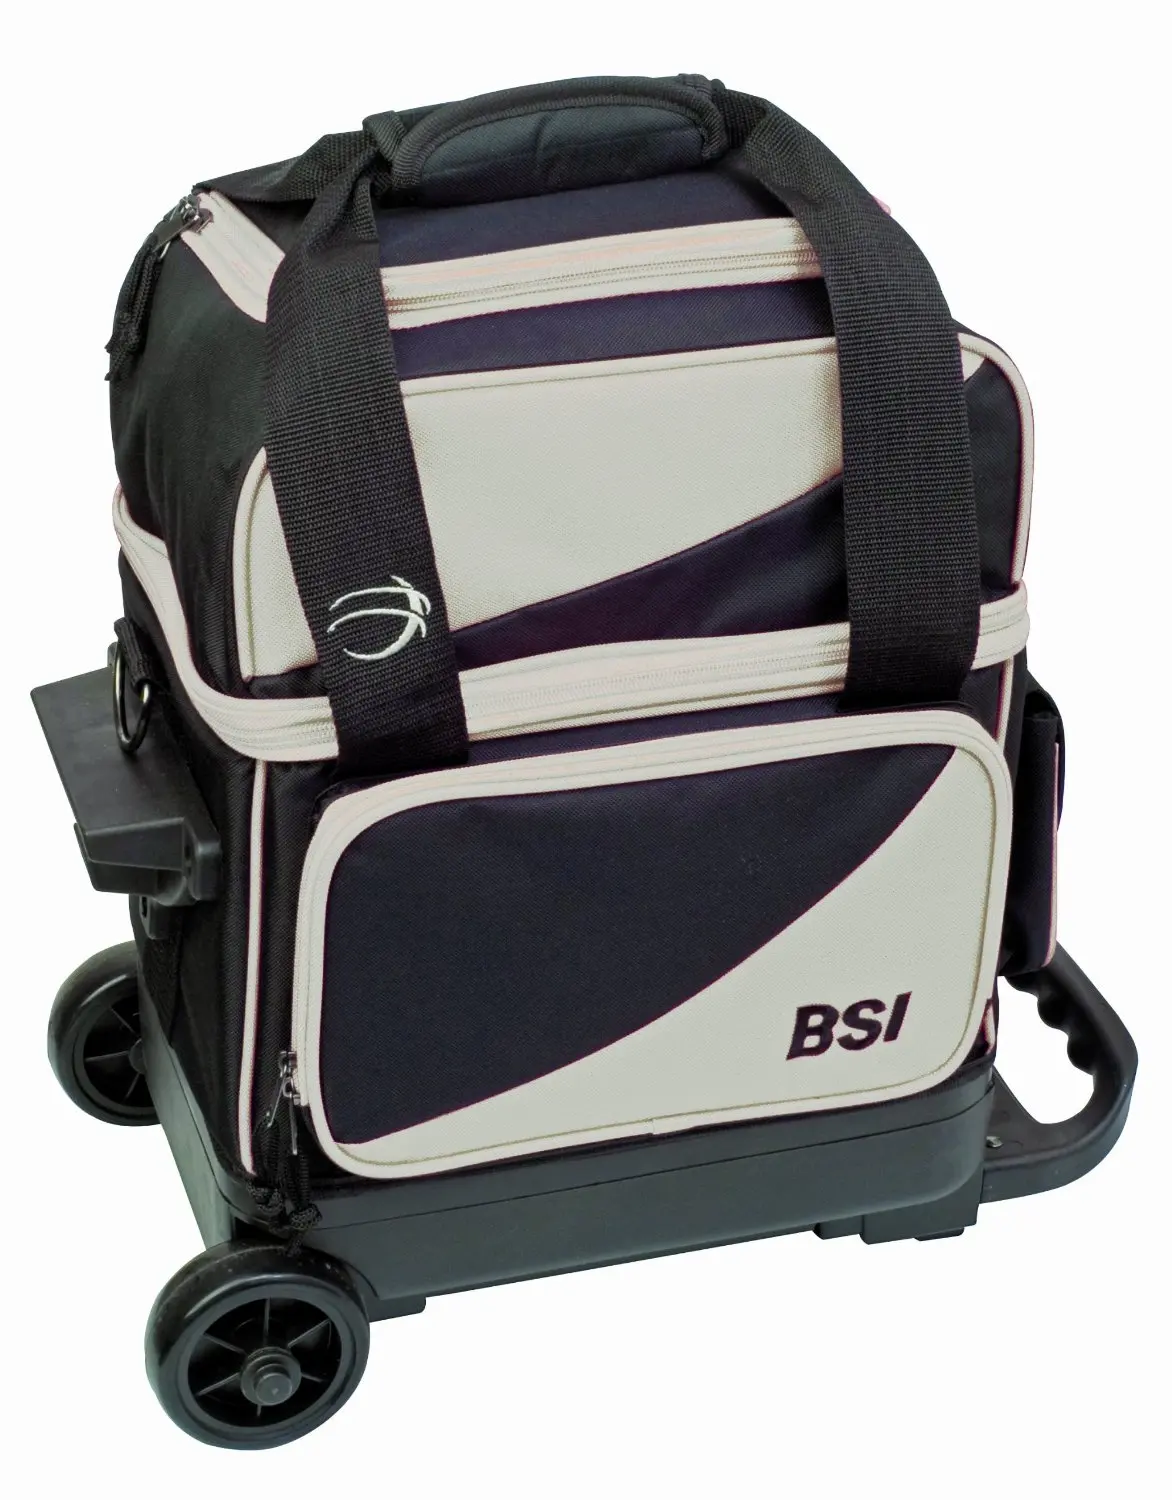 Buy BSI Single Ball Roller Bowling Bag, Black/Grey in Cheap Price on ...